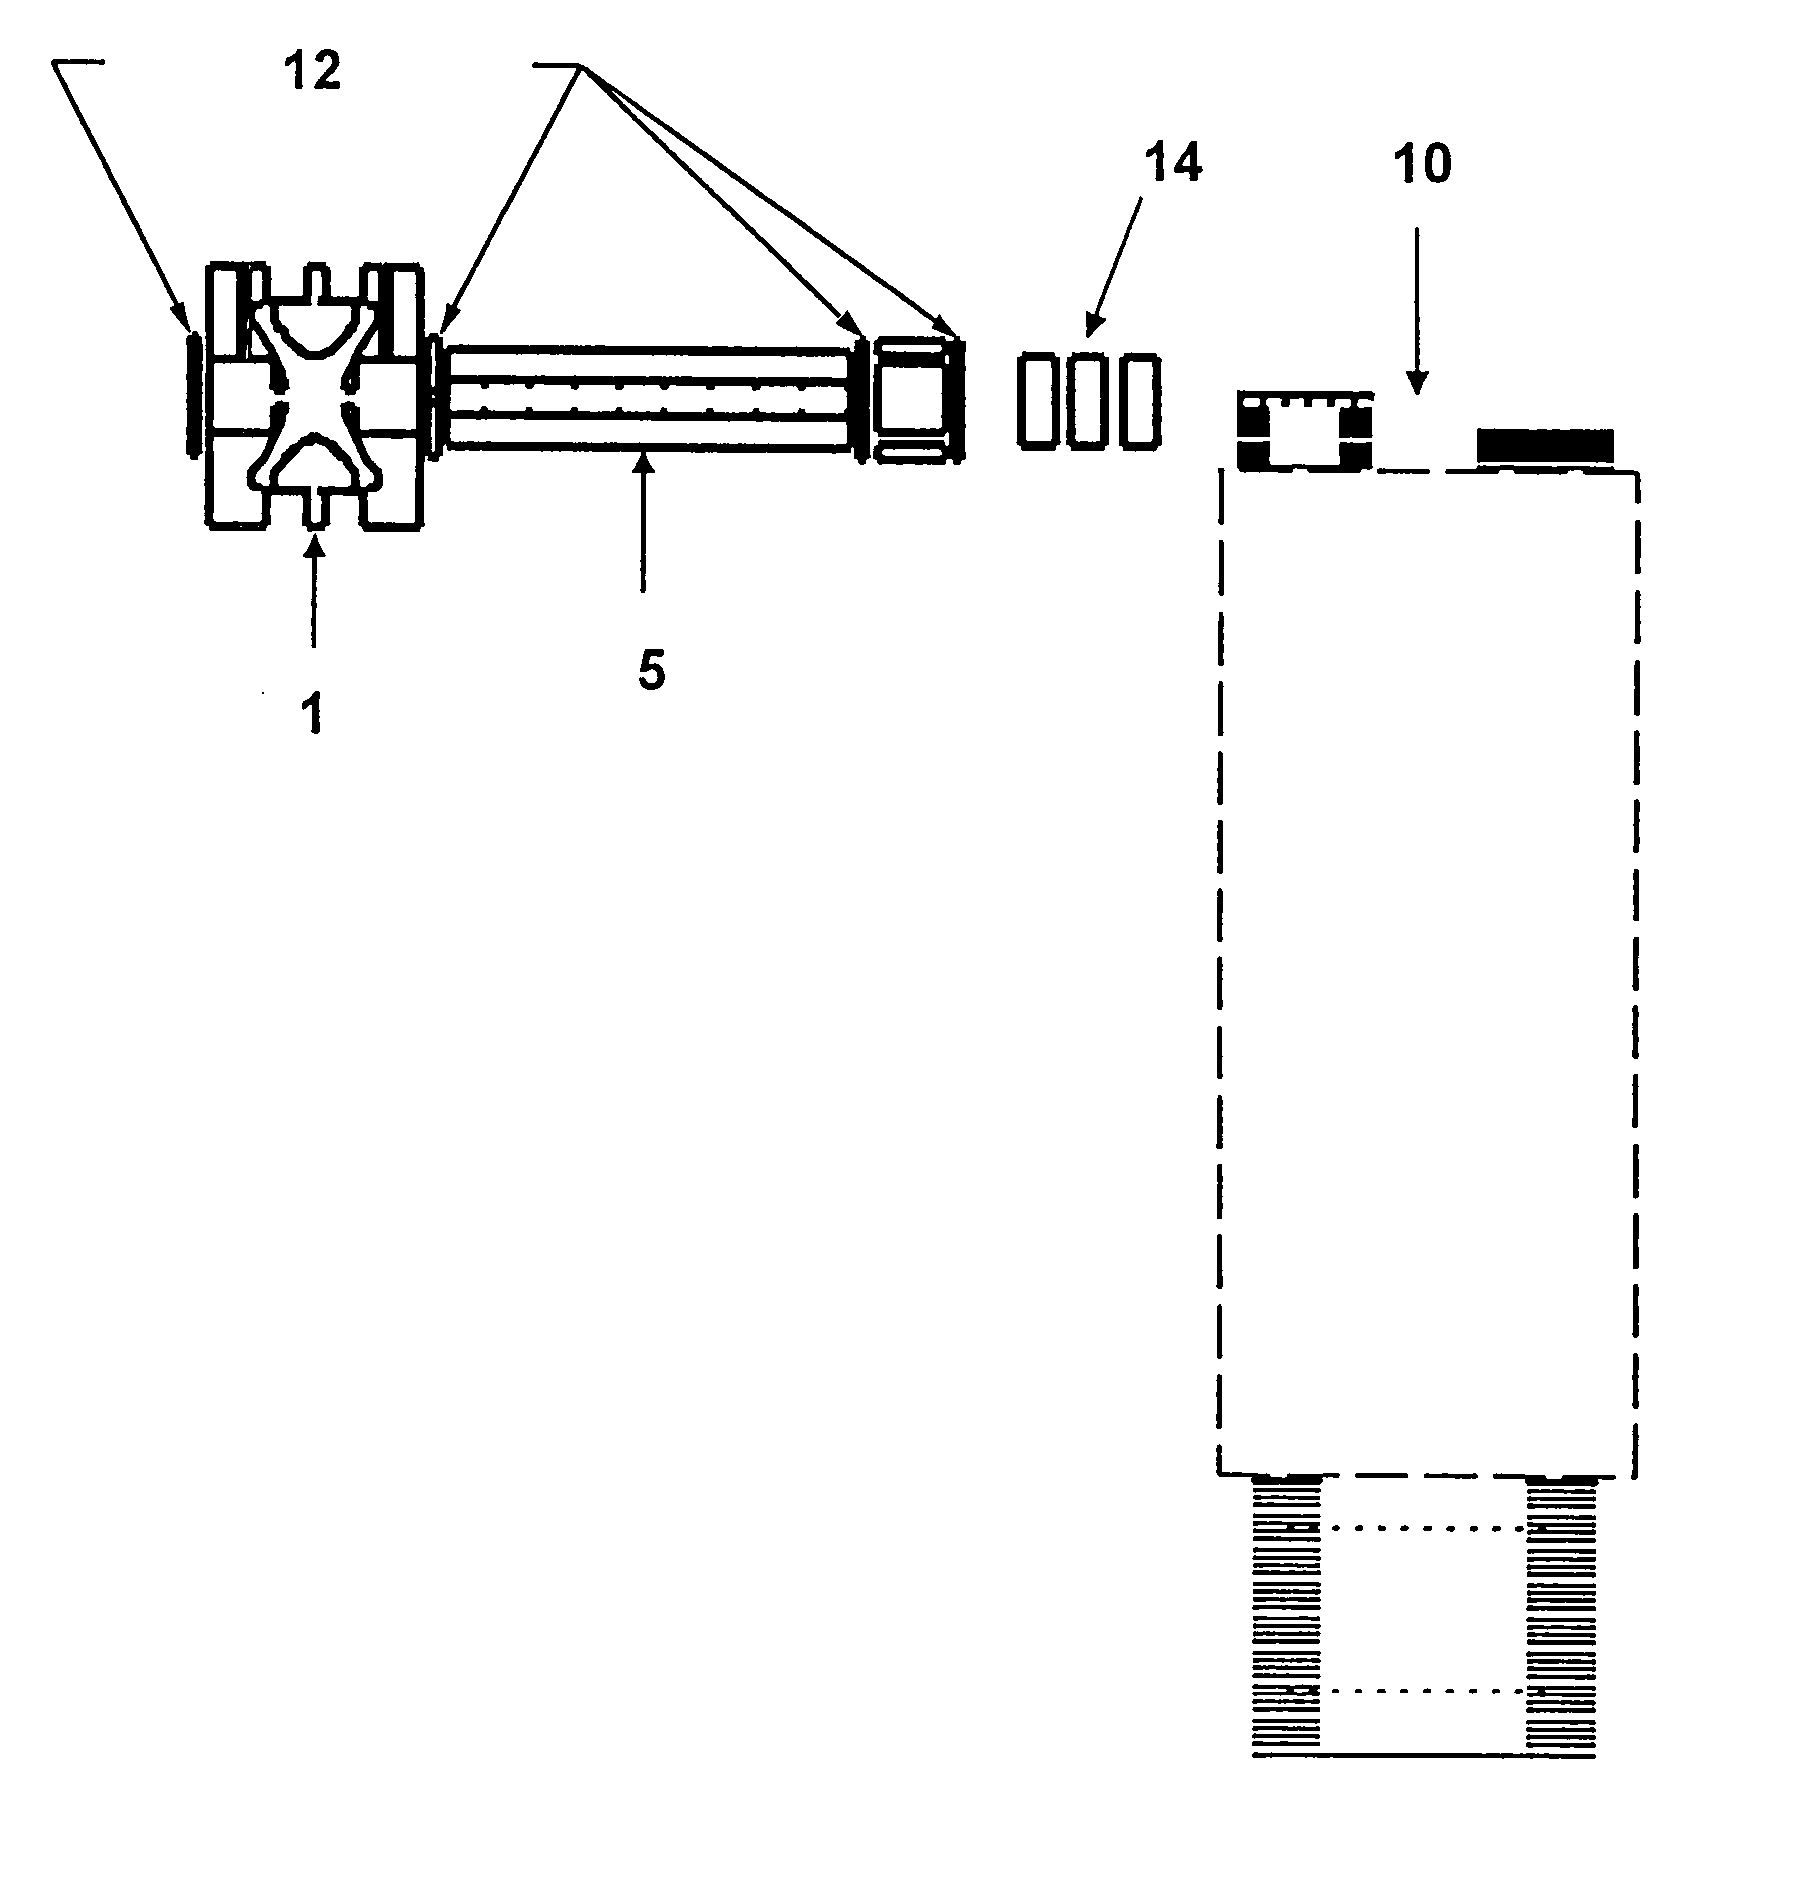 Tandem-in-time and-in-space mass spectrometer and associated method for tandem mass spectrometry